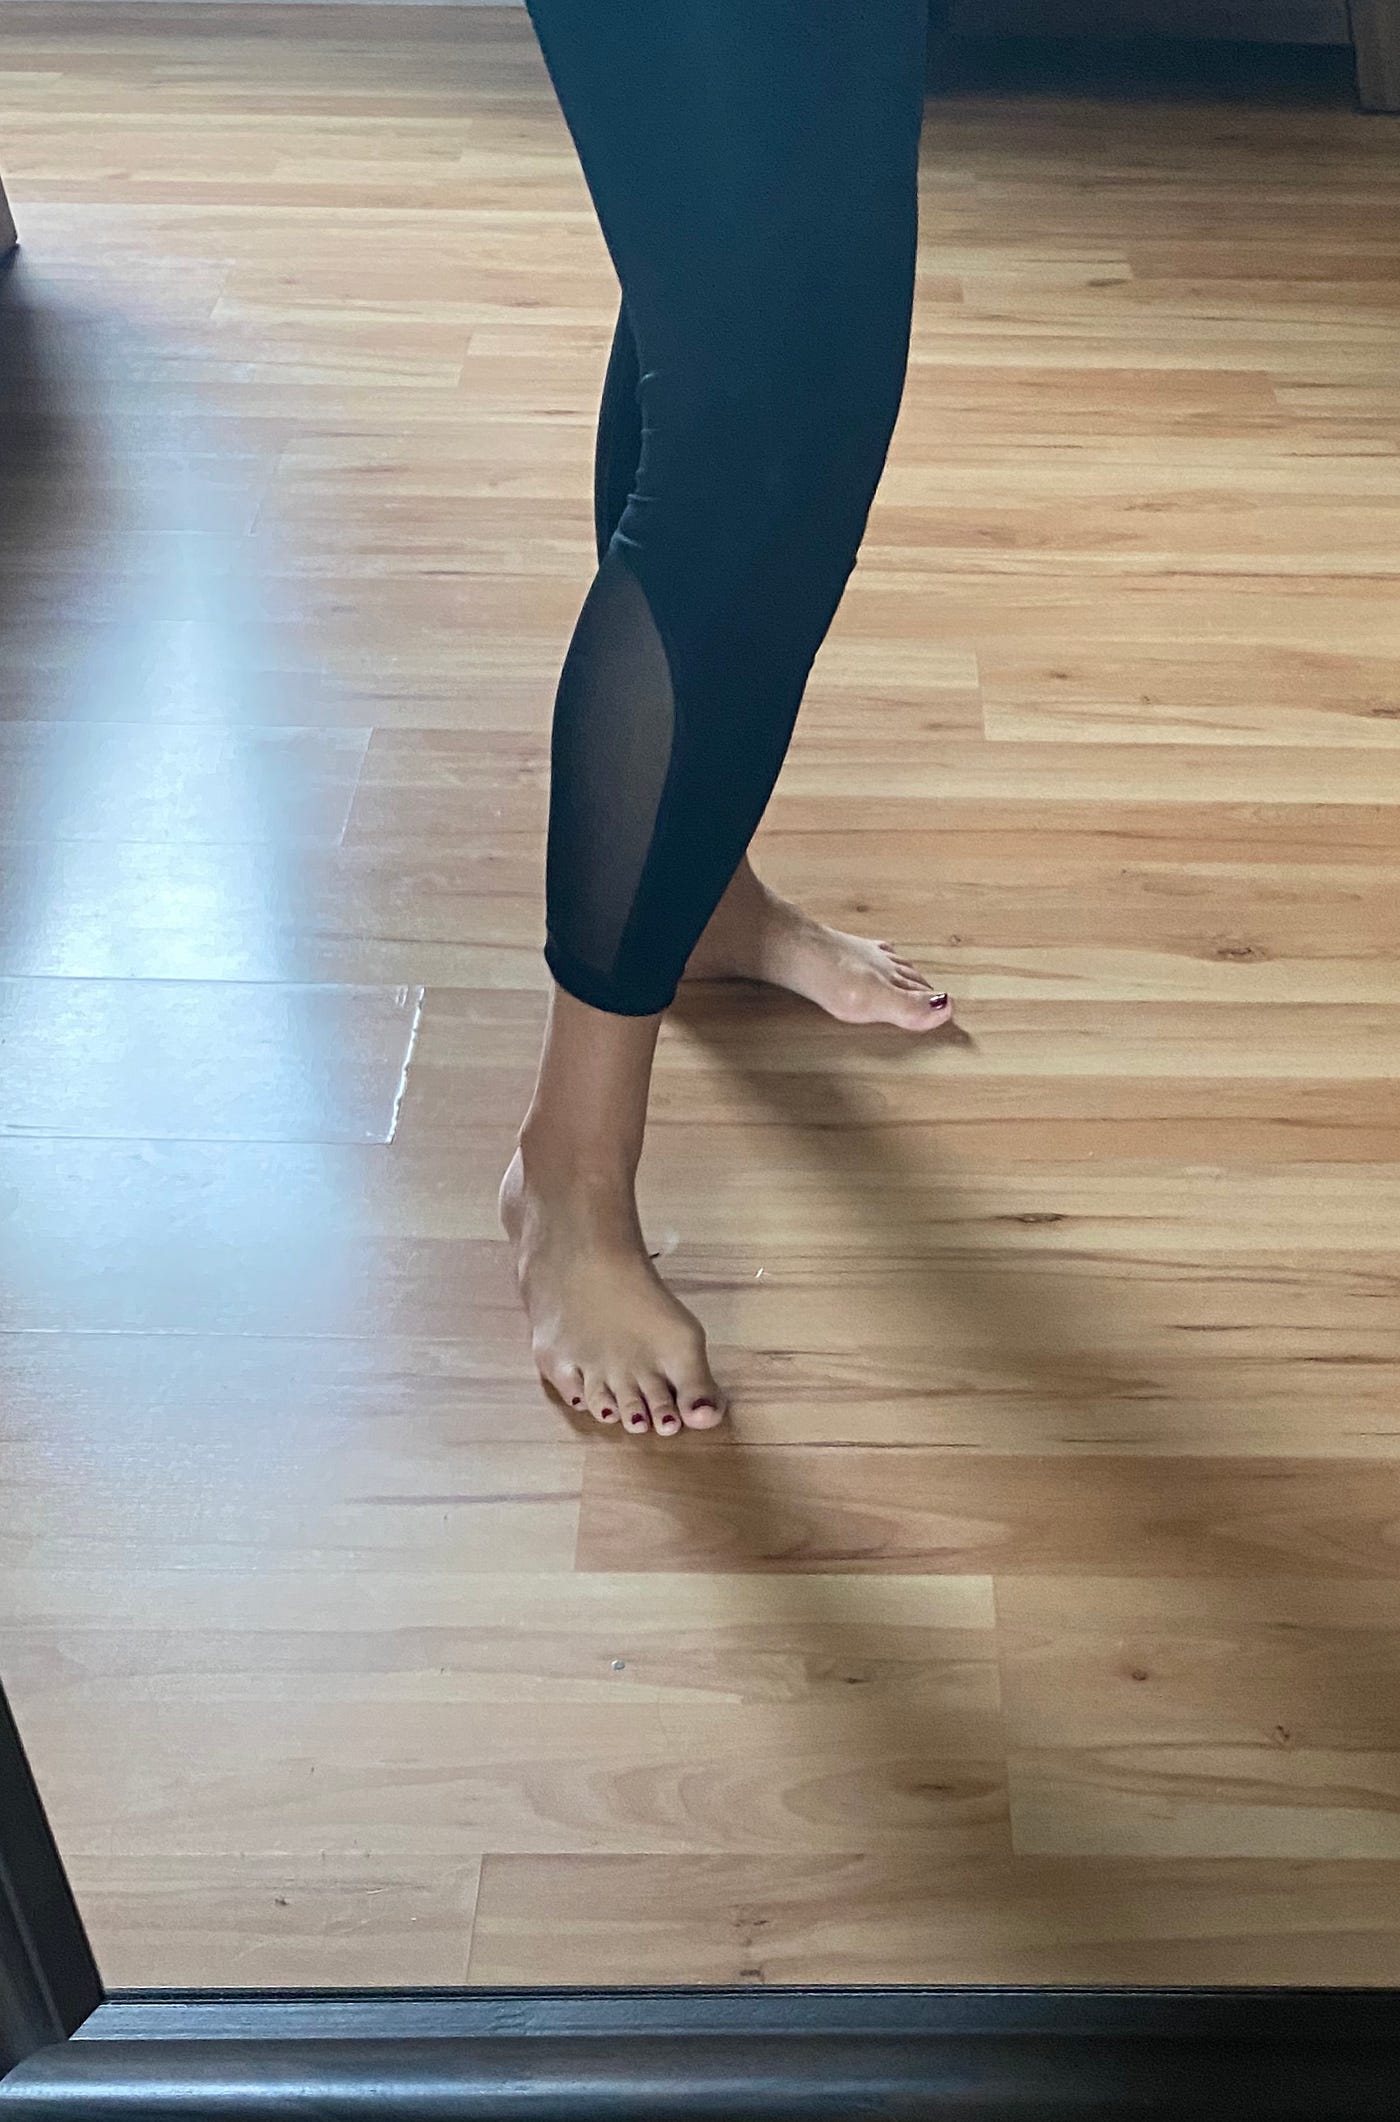 Product Review: Nike Pro Tights. Product: Nike Pro Tight 7/8 $55 ///… | by  Marcella Fredericks | Medium